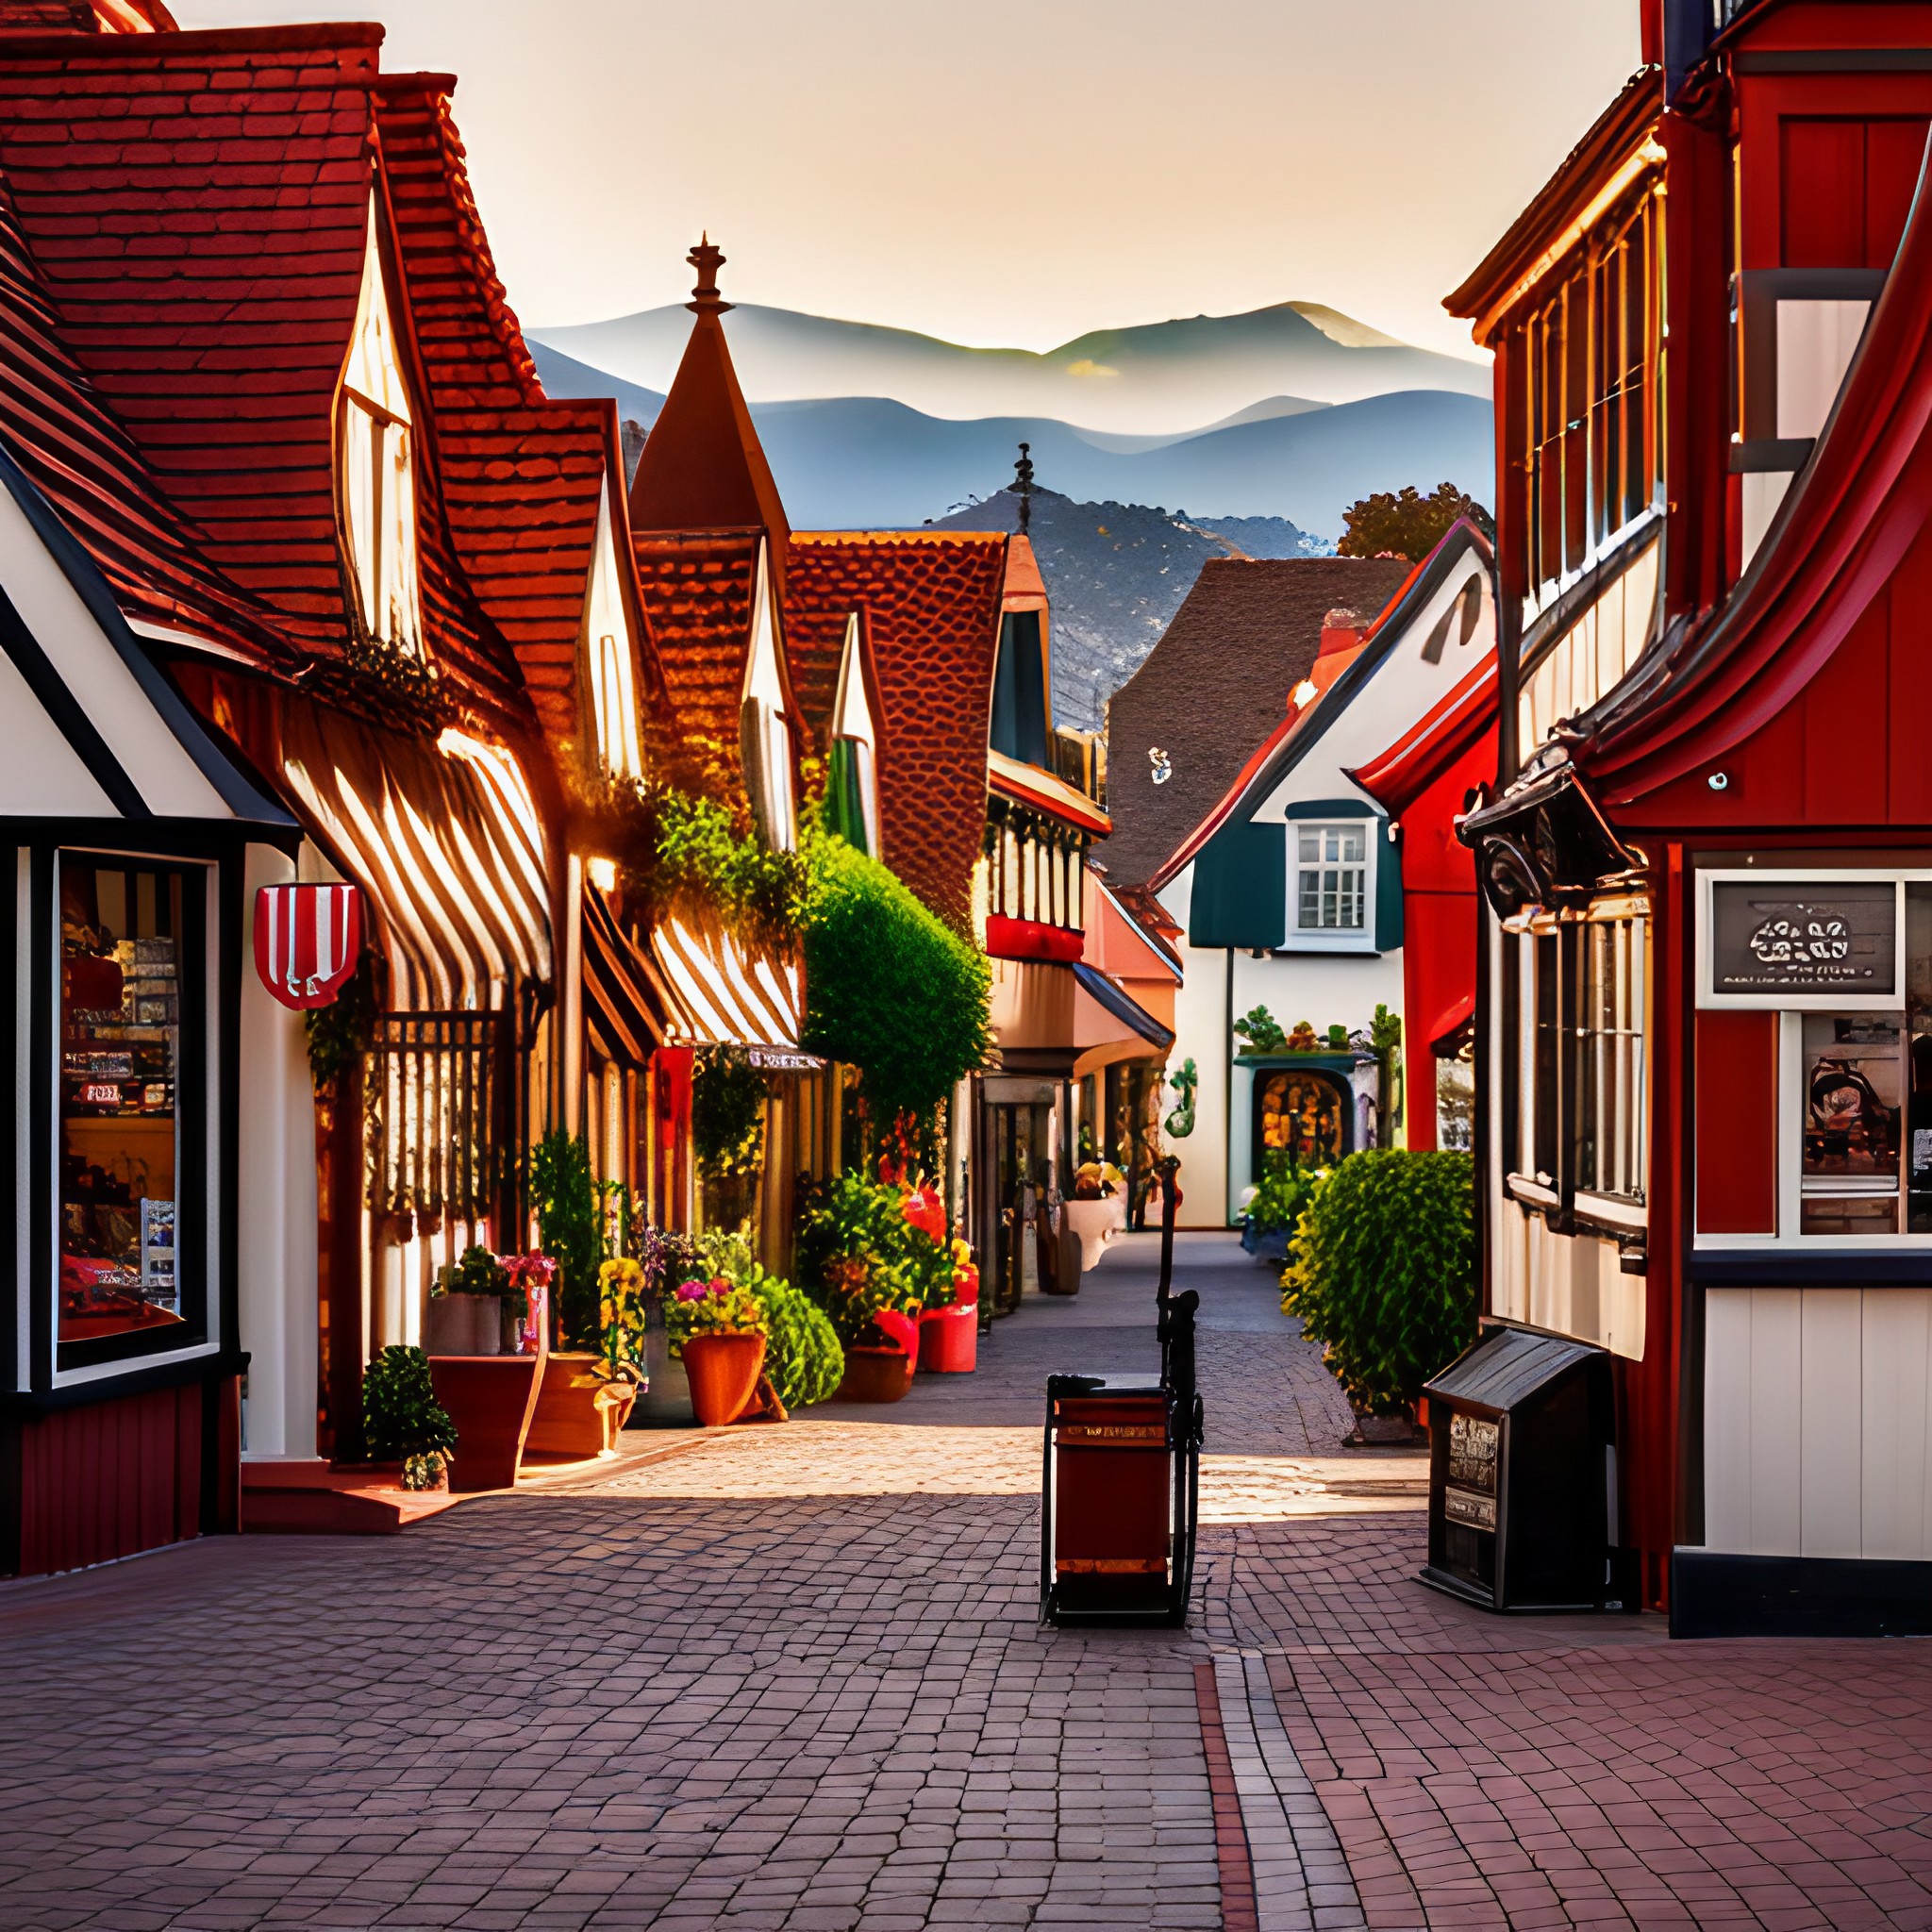 Solvang side streets are amazing!